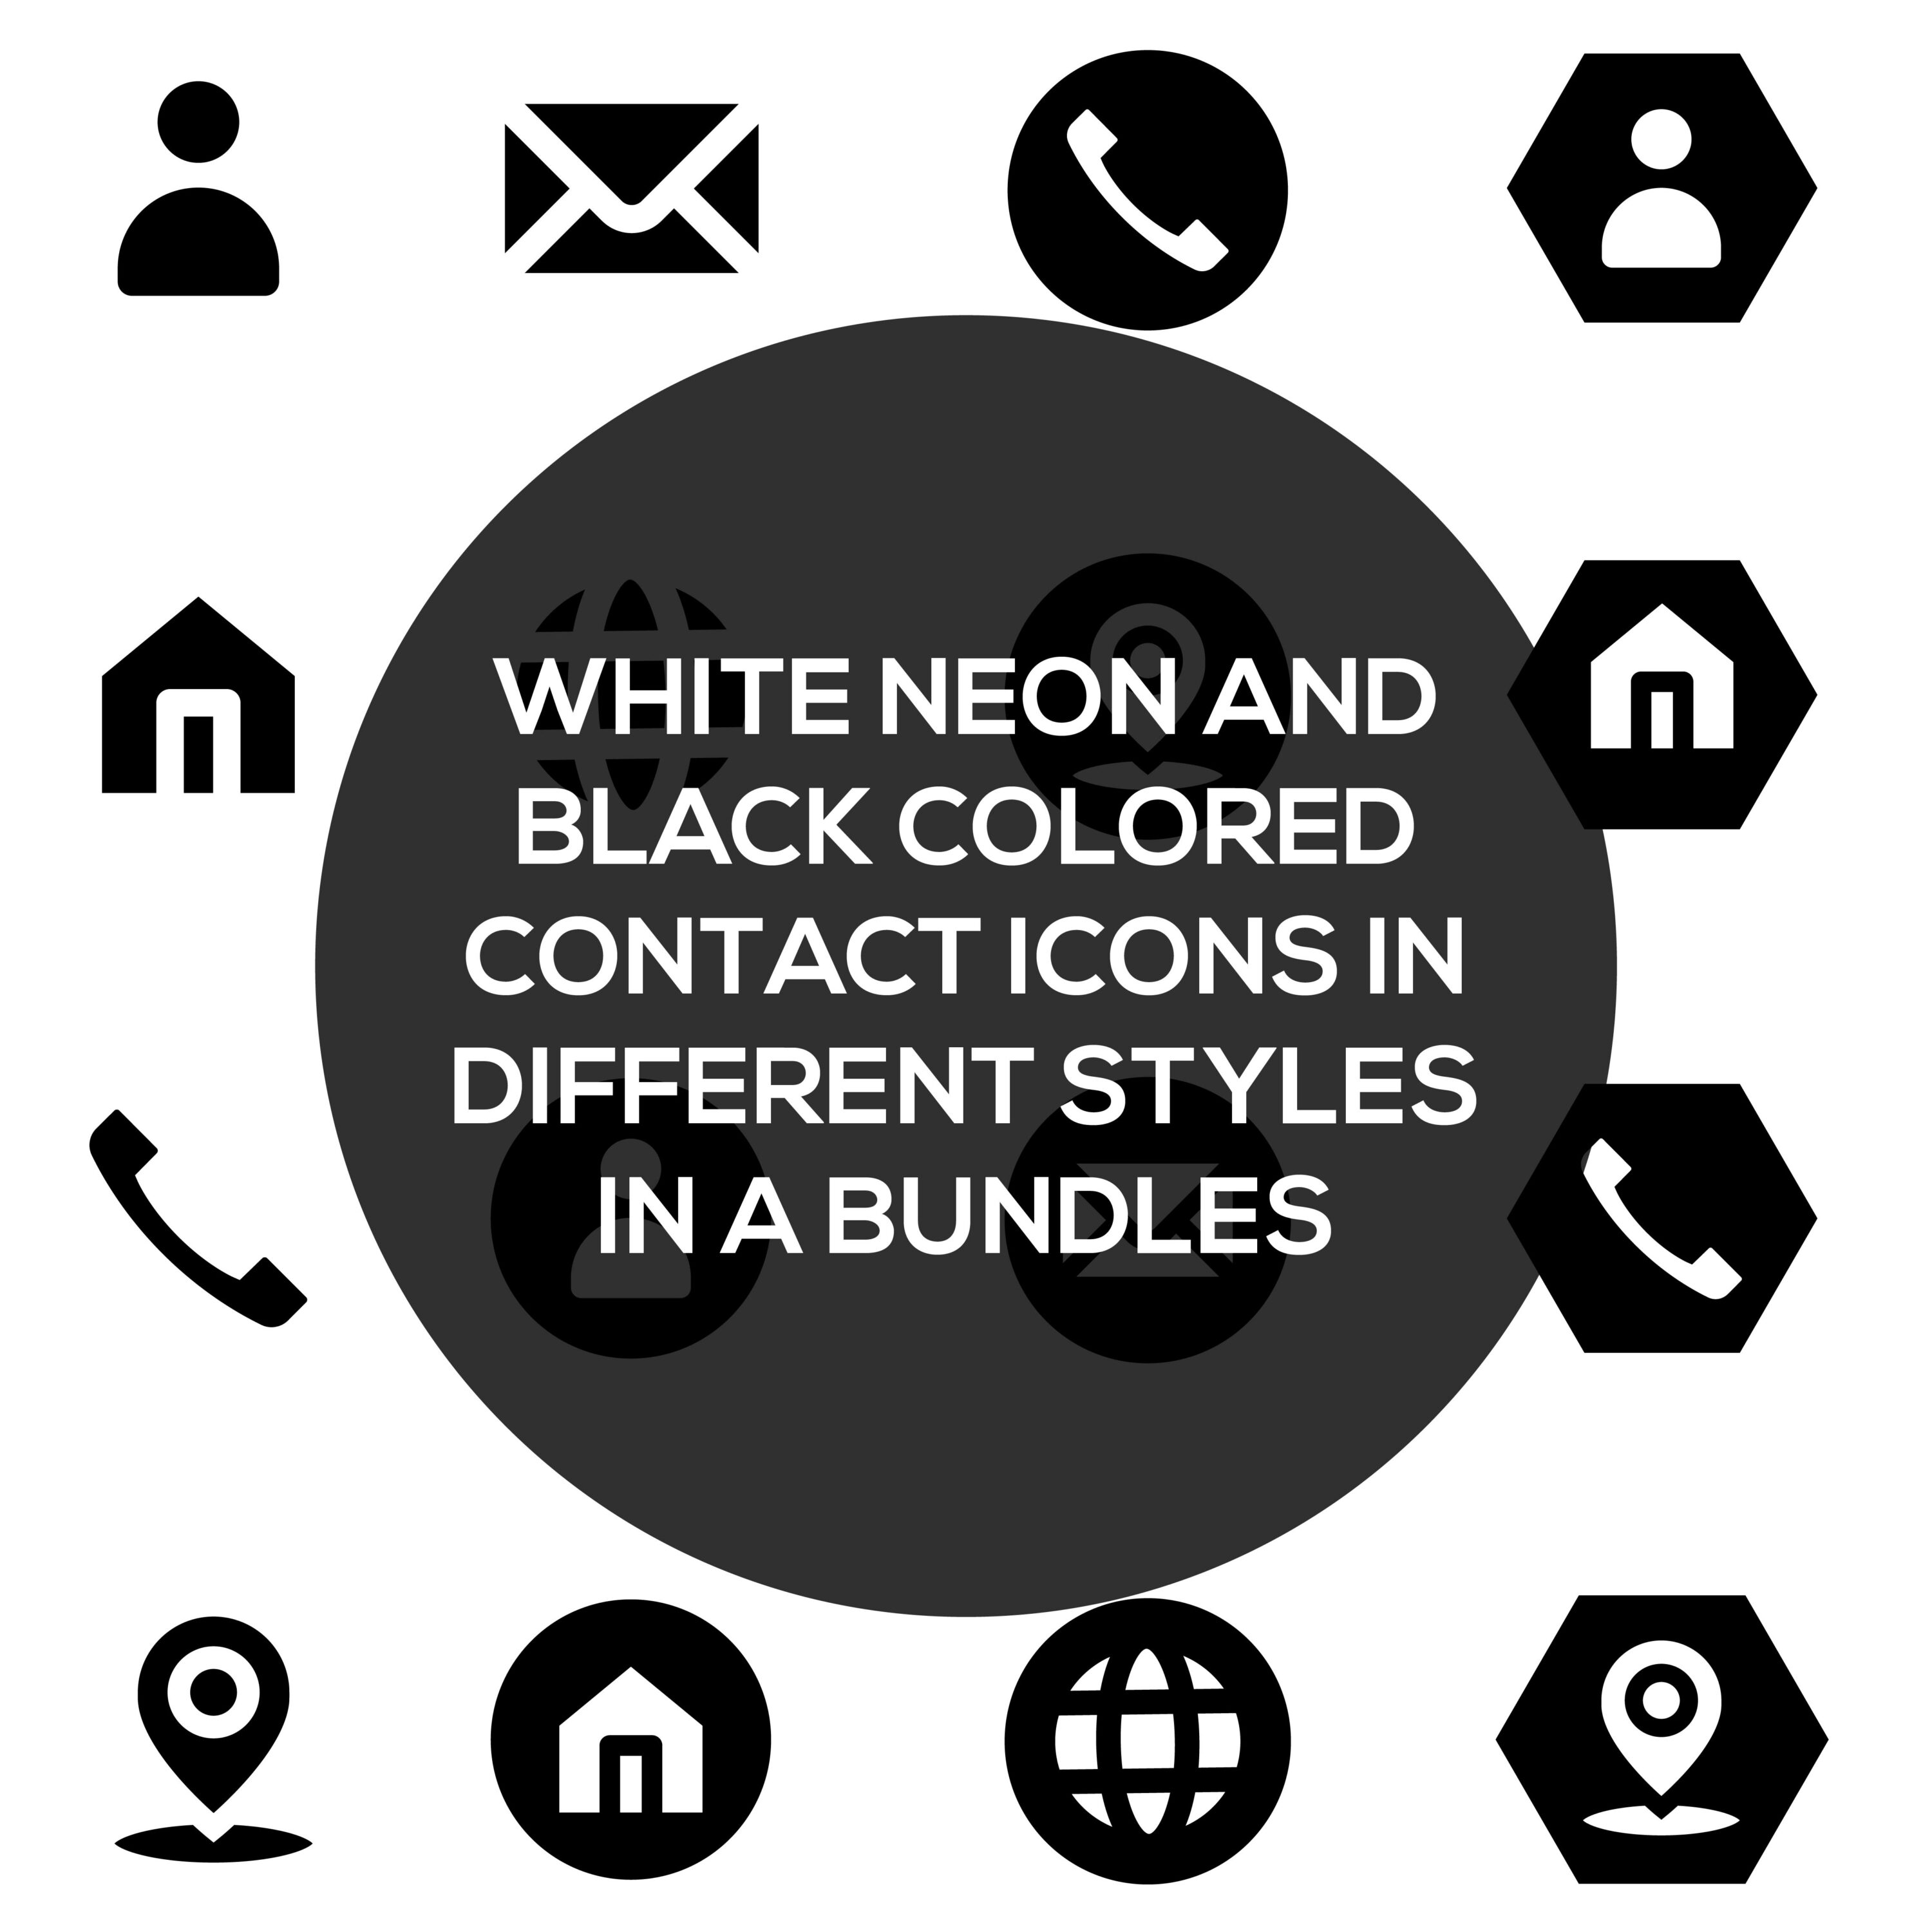 White Neon And Black Filled Contact Icons cover image.